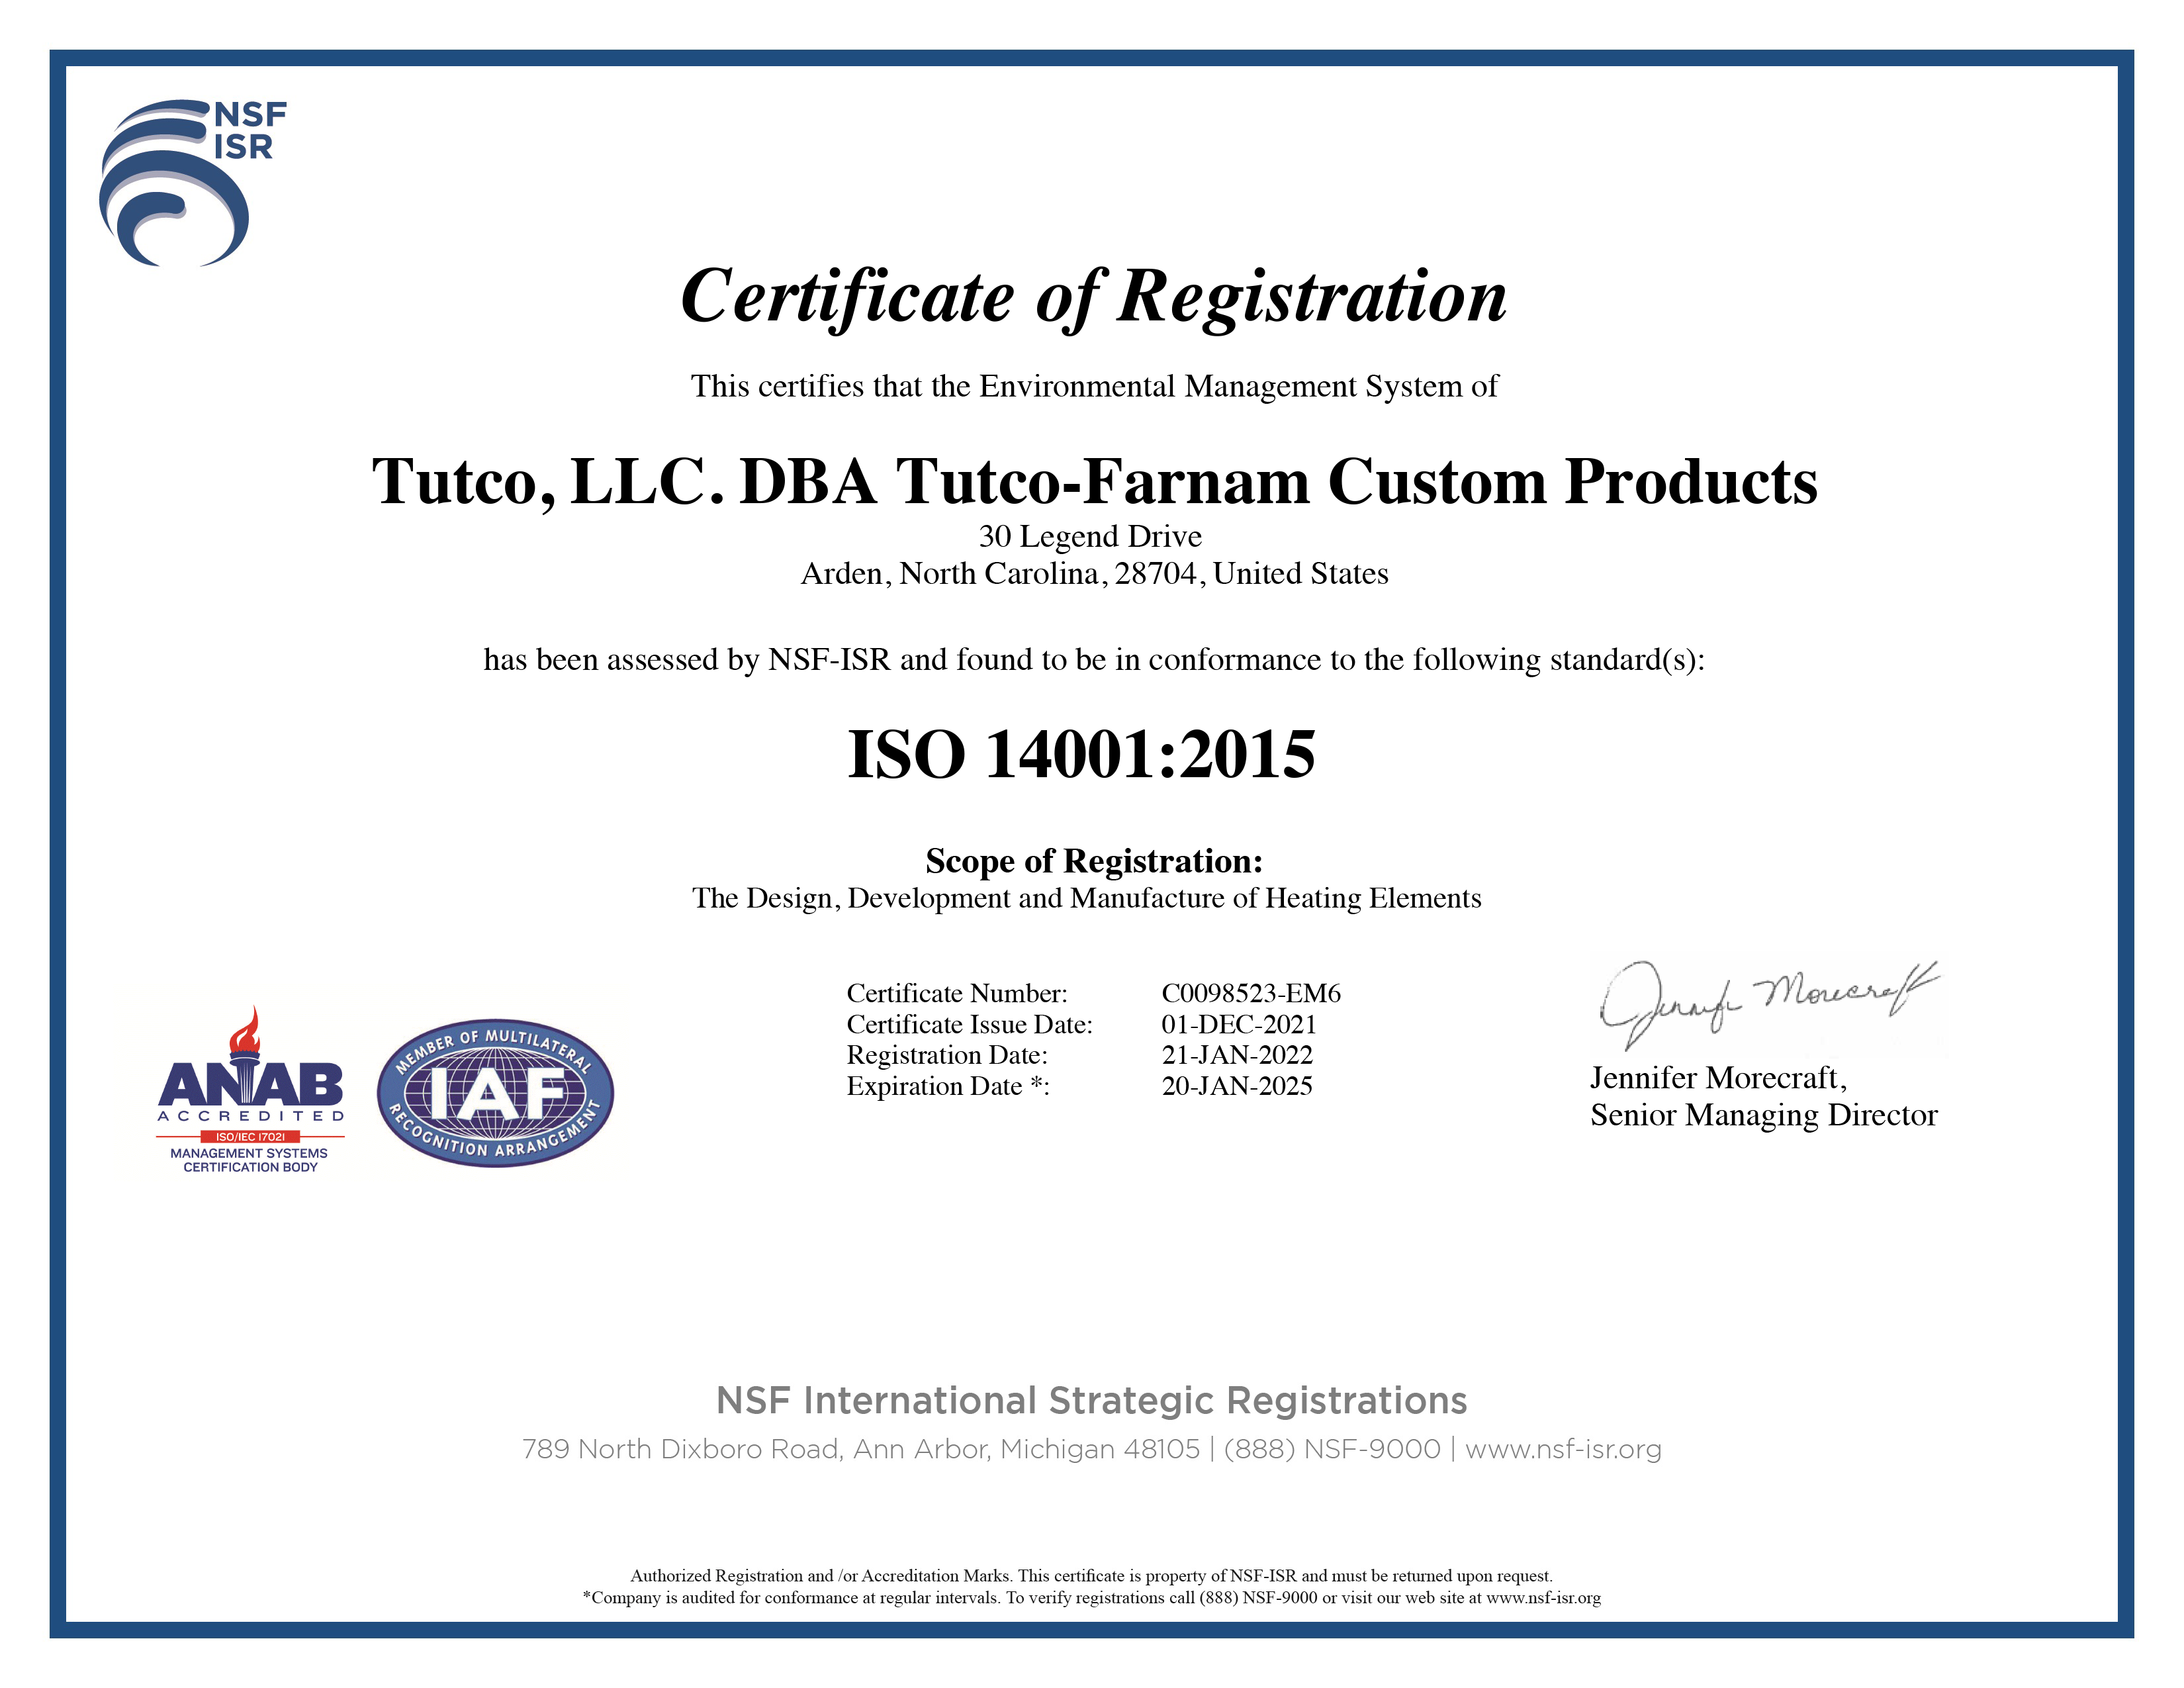 The ISO 14000 standards help companies to manage their environmental responsibilities.